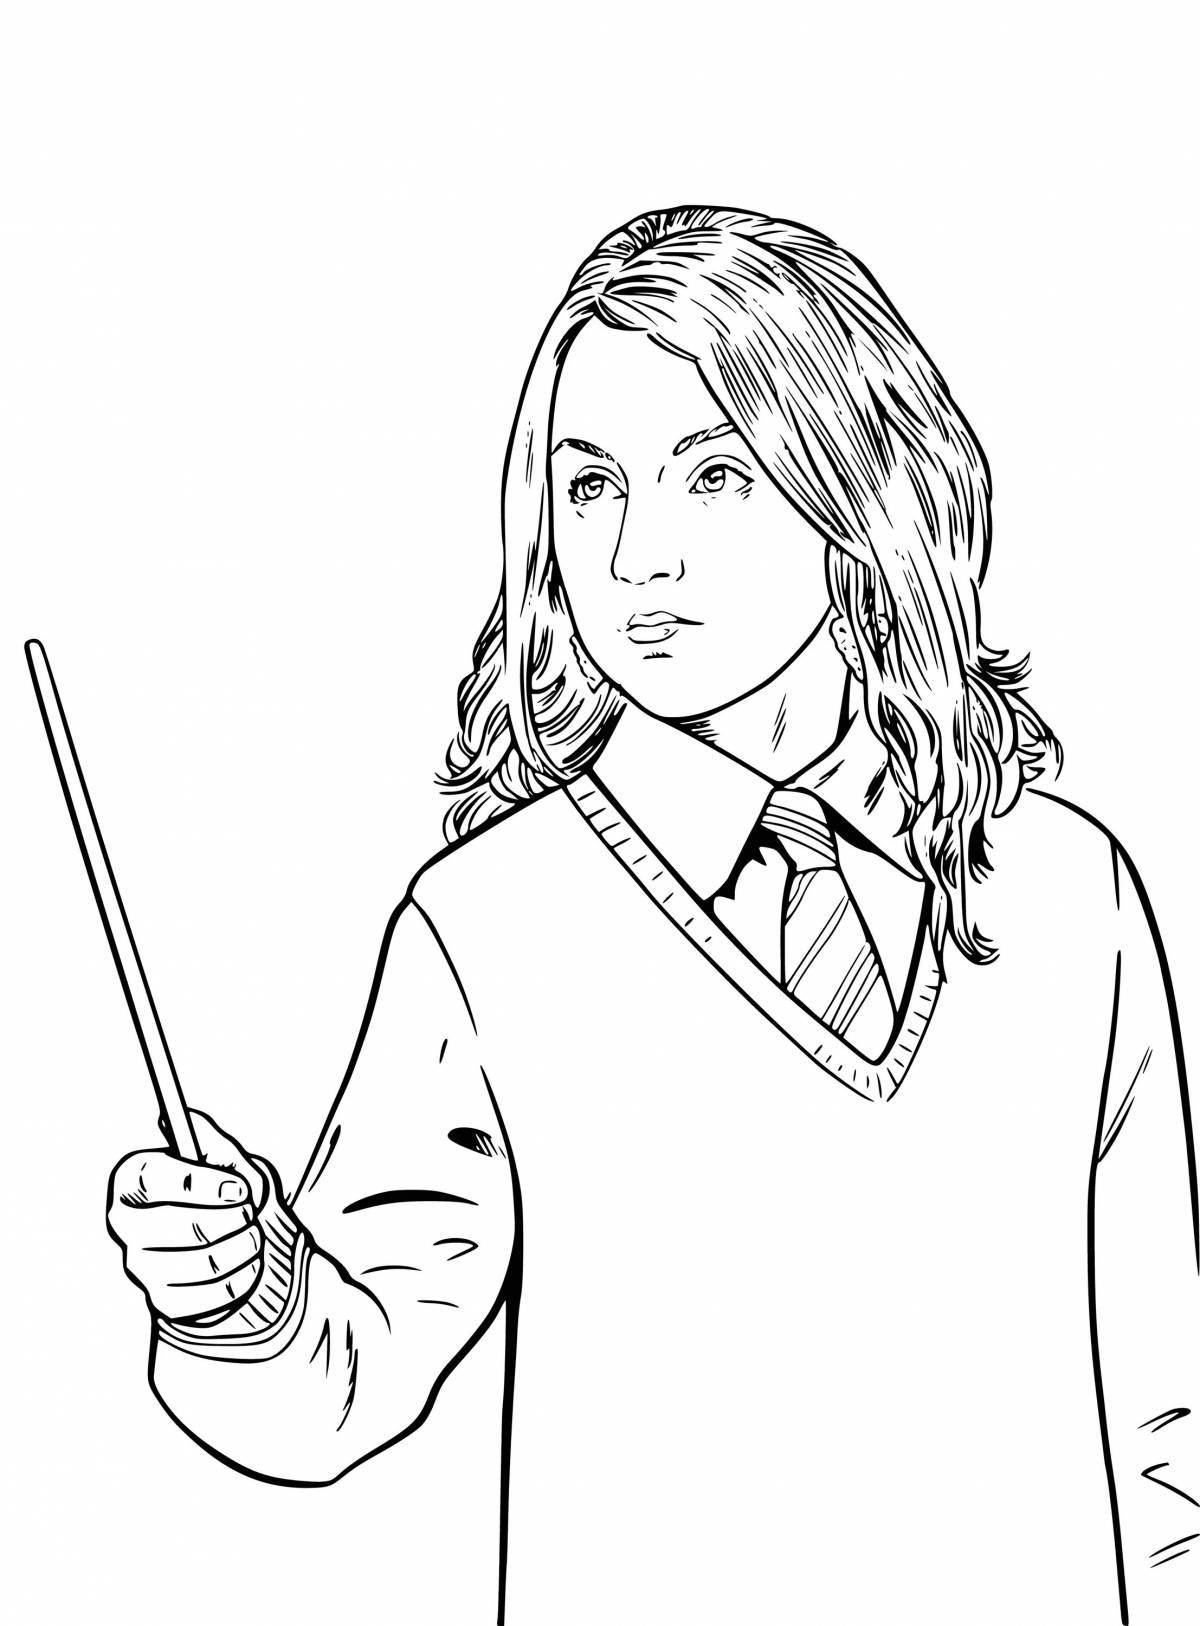 Charming light harry potter coloring book